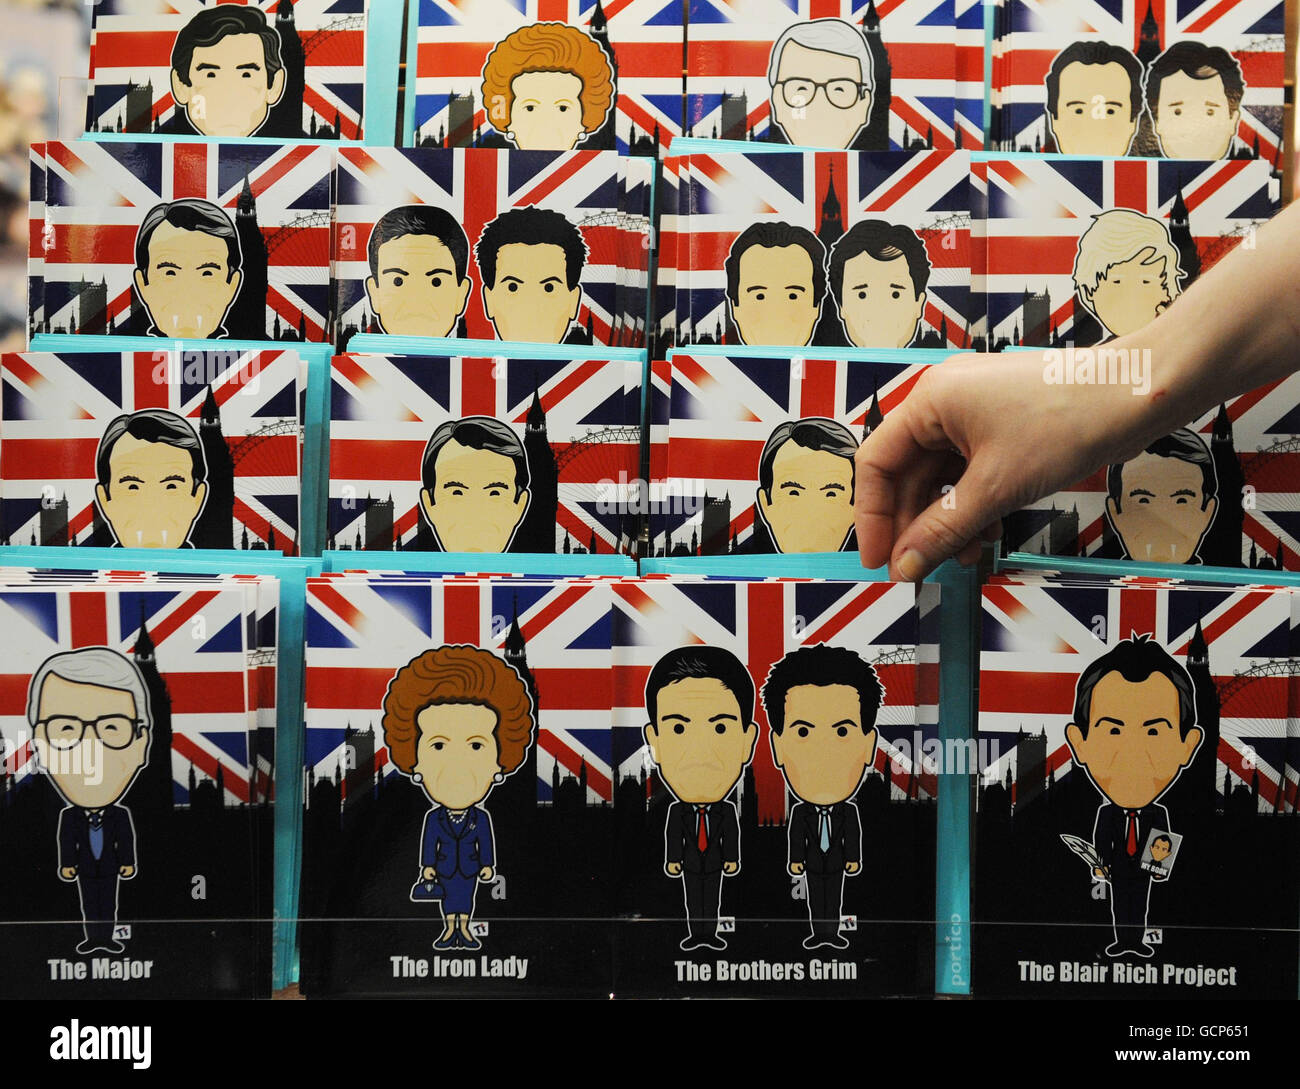 Greeting cards depicting former members of the government go on sale at the Conservative Party annual conference in Birmingham. Stock Photo